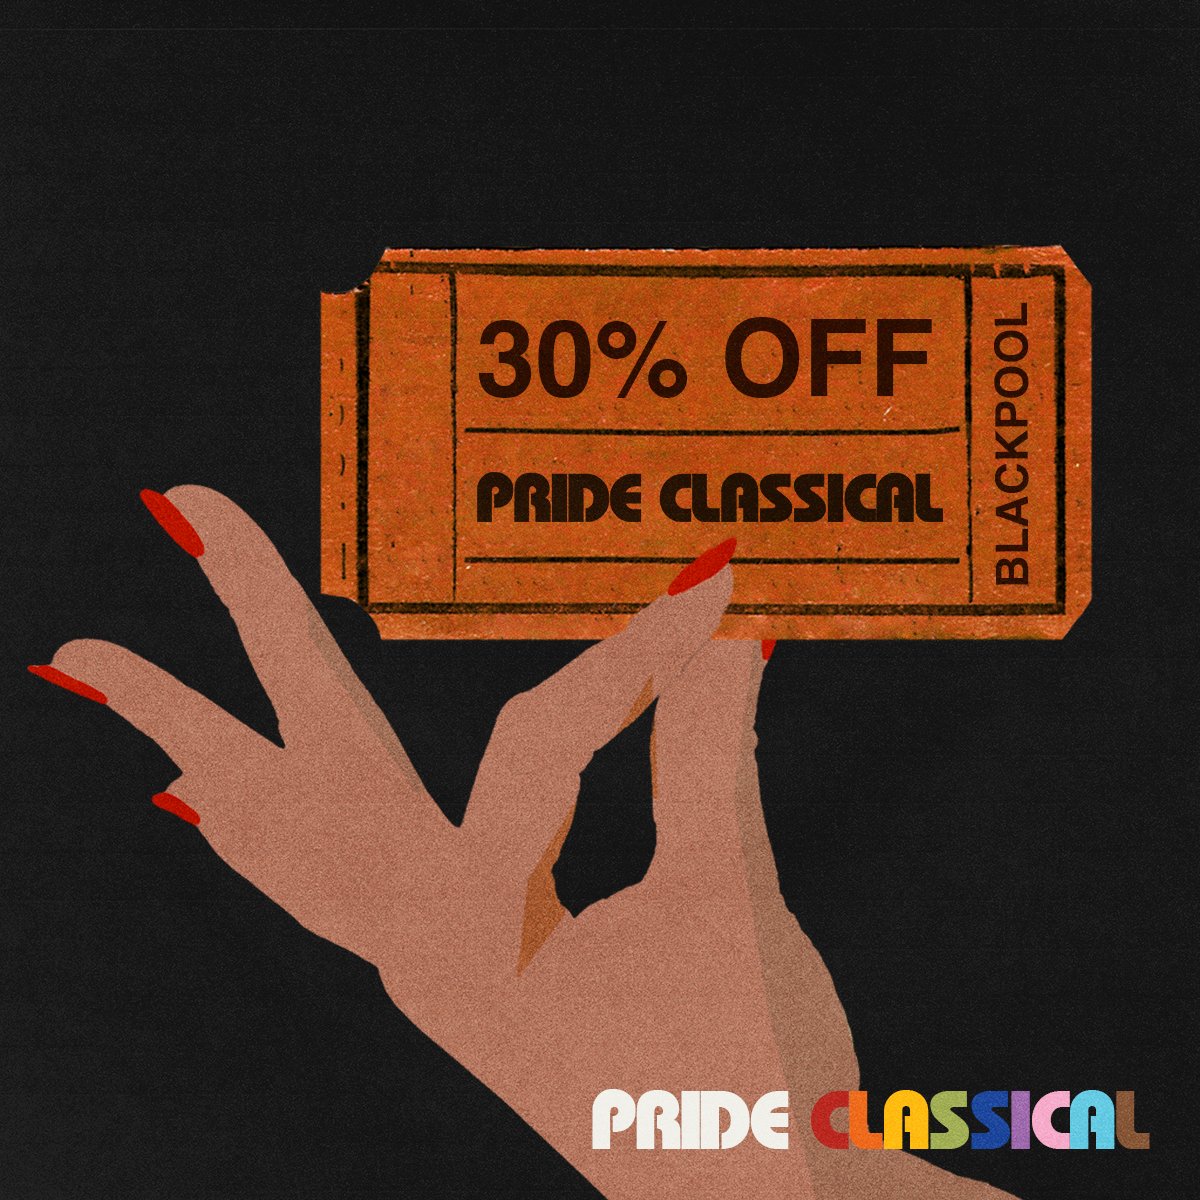 We've teamed up with Blackpool Pride to offer 30% off Pride Classical tickets for all Blackpool Pride ticket-holders. Get your @prideblackpool tickets now to access the 30% off discount code which you can use when booking your #PrideClassical tickets at prideclassical.com🎟